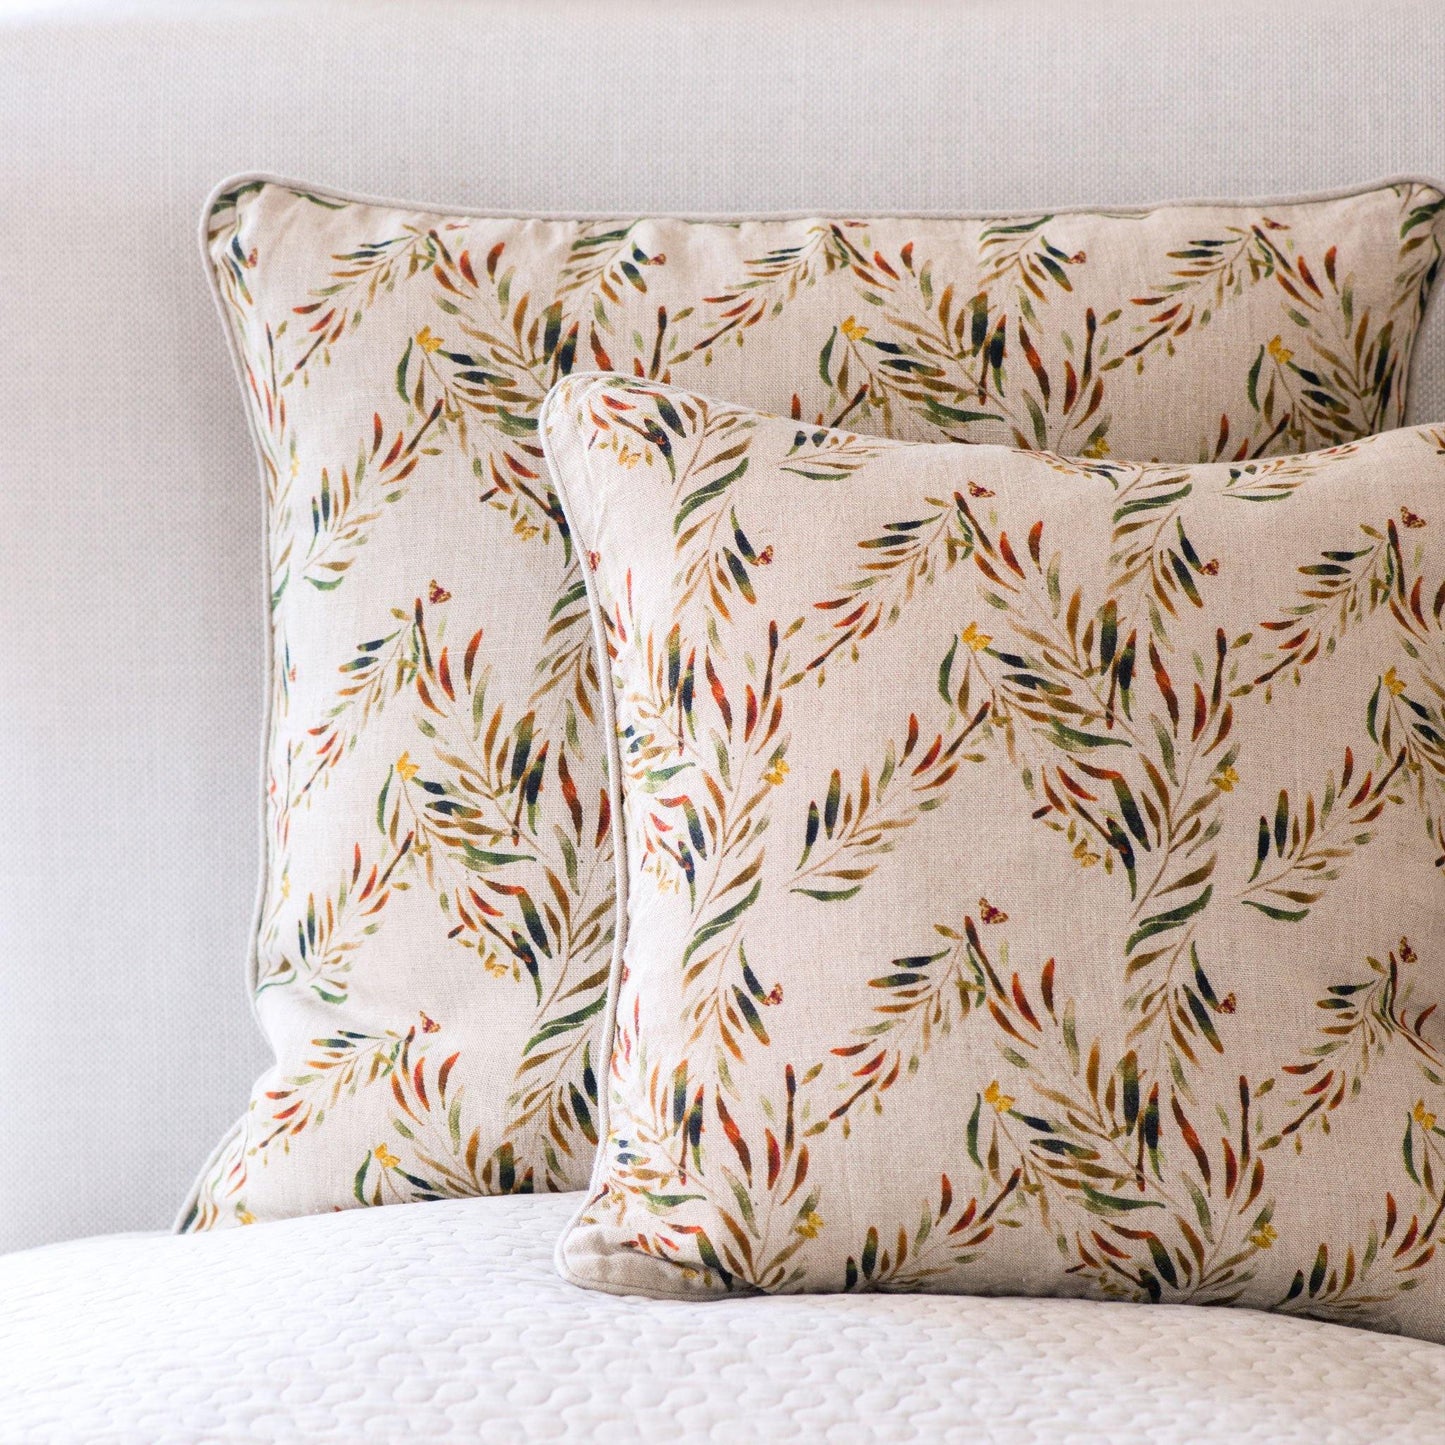 Organic Linen Pillow Cover in Red Palm - Sophie Williamson Fabrics